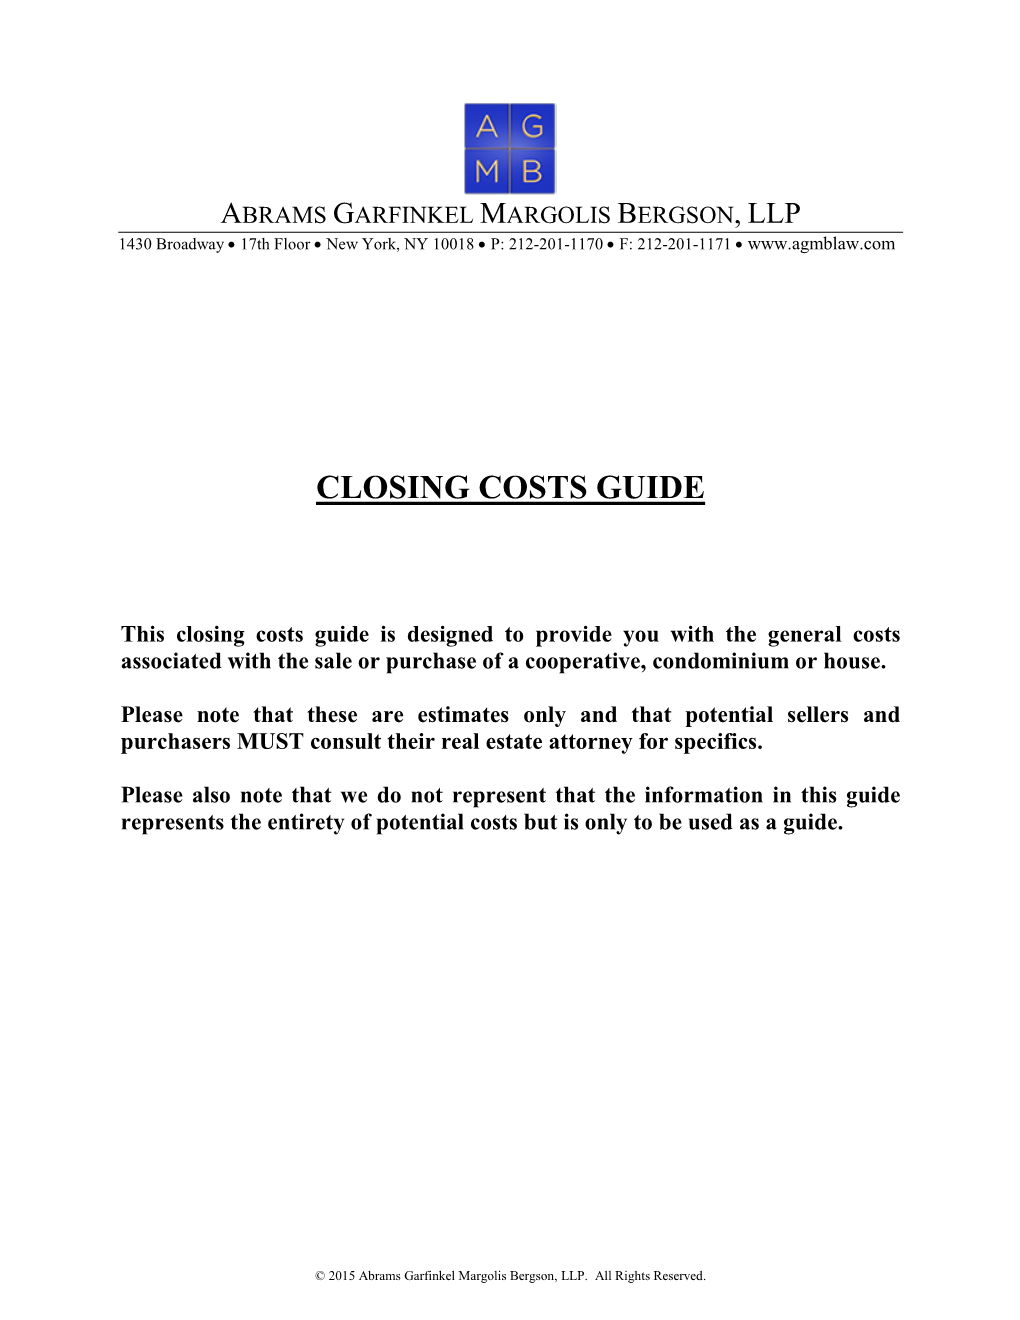 Closing Costs Guide